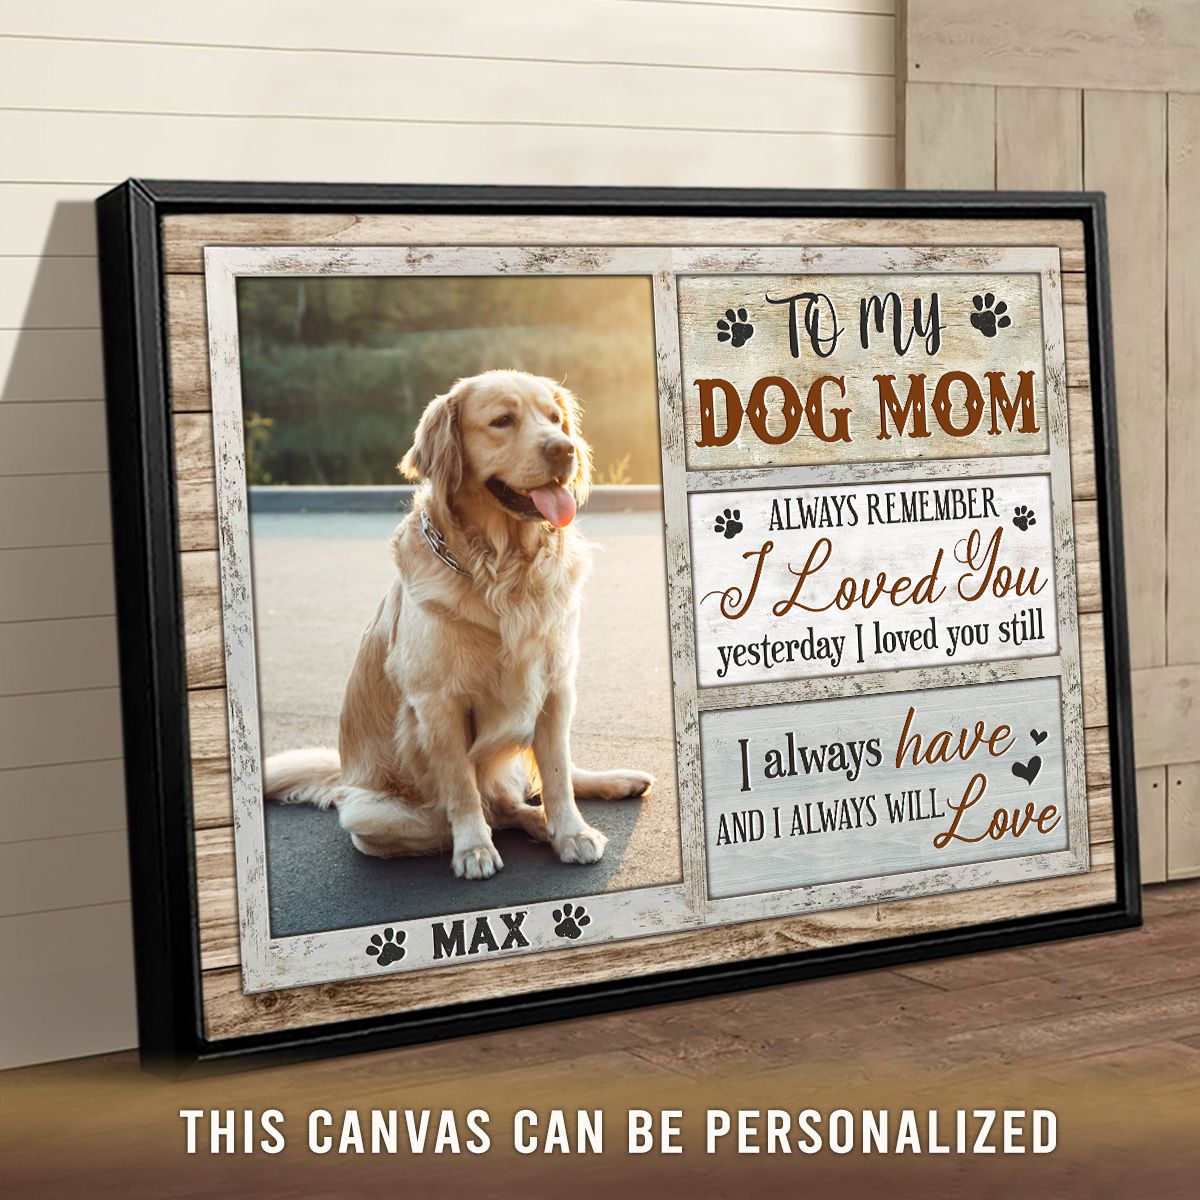 https://images.ohcanvas.com/ohcanvas_com/2022/03/09180954/personalized-gift-for-dog-mom-always-remember-i-loved-you-yesterday-canvas-print01.jpg